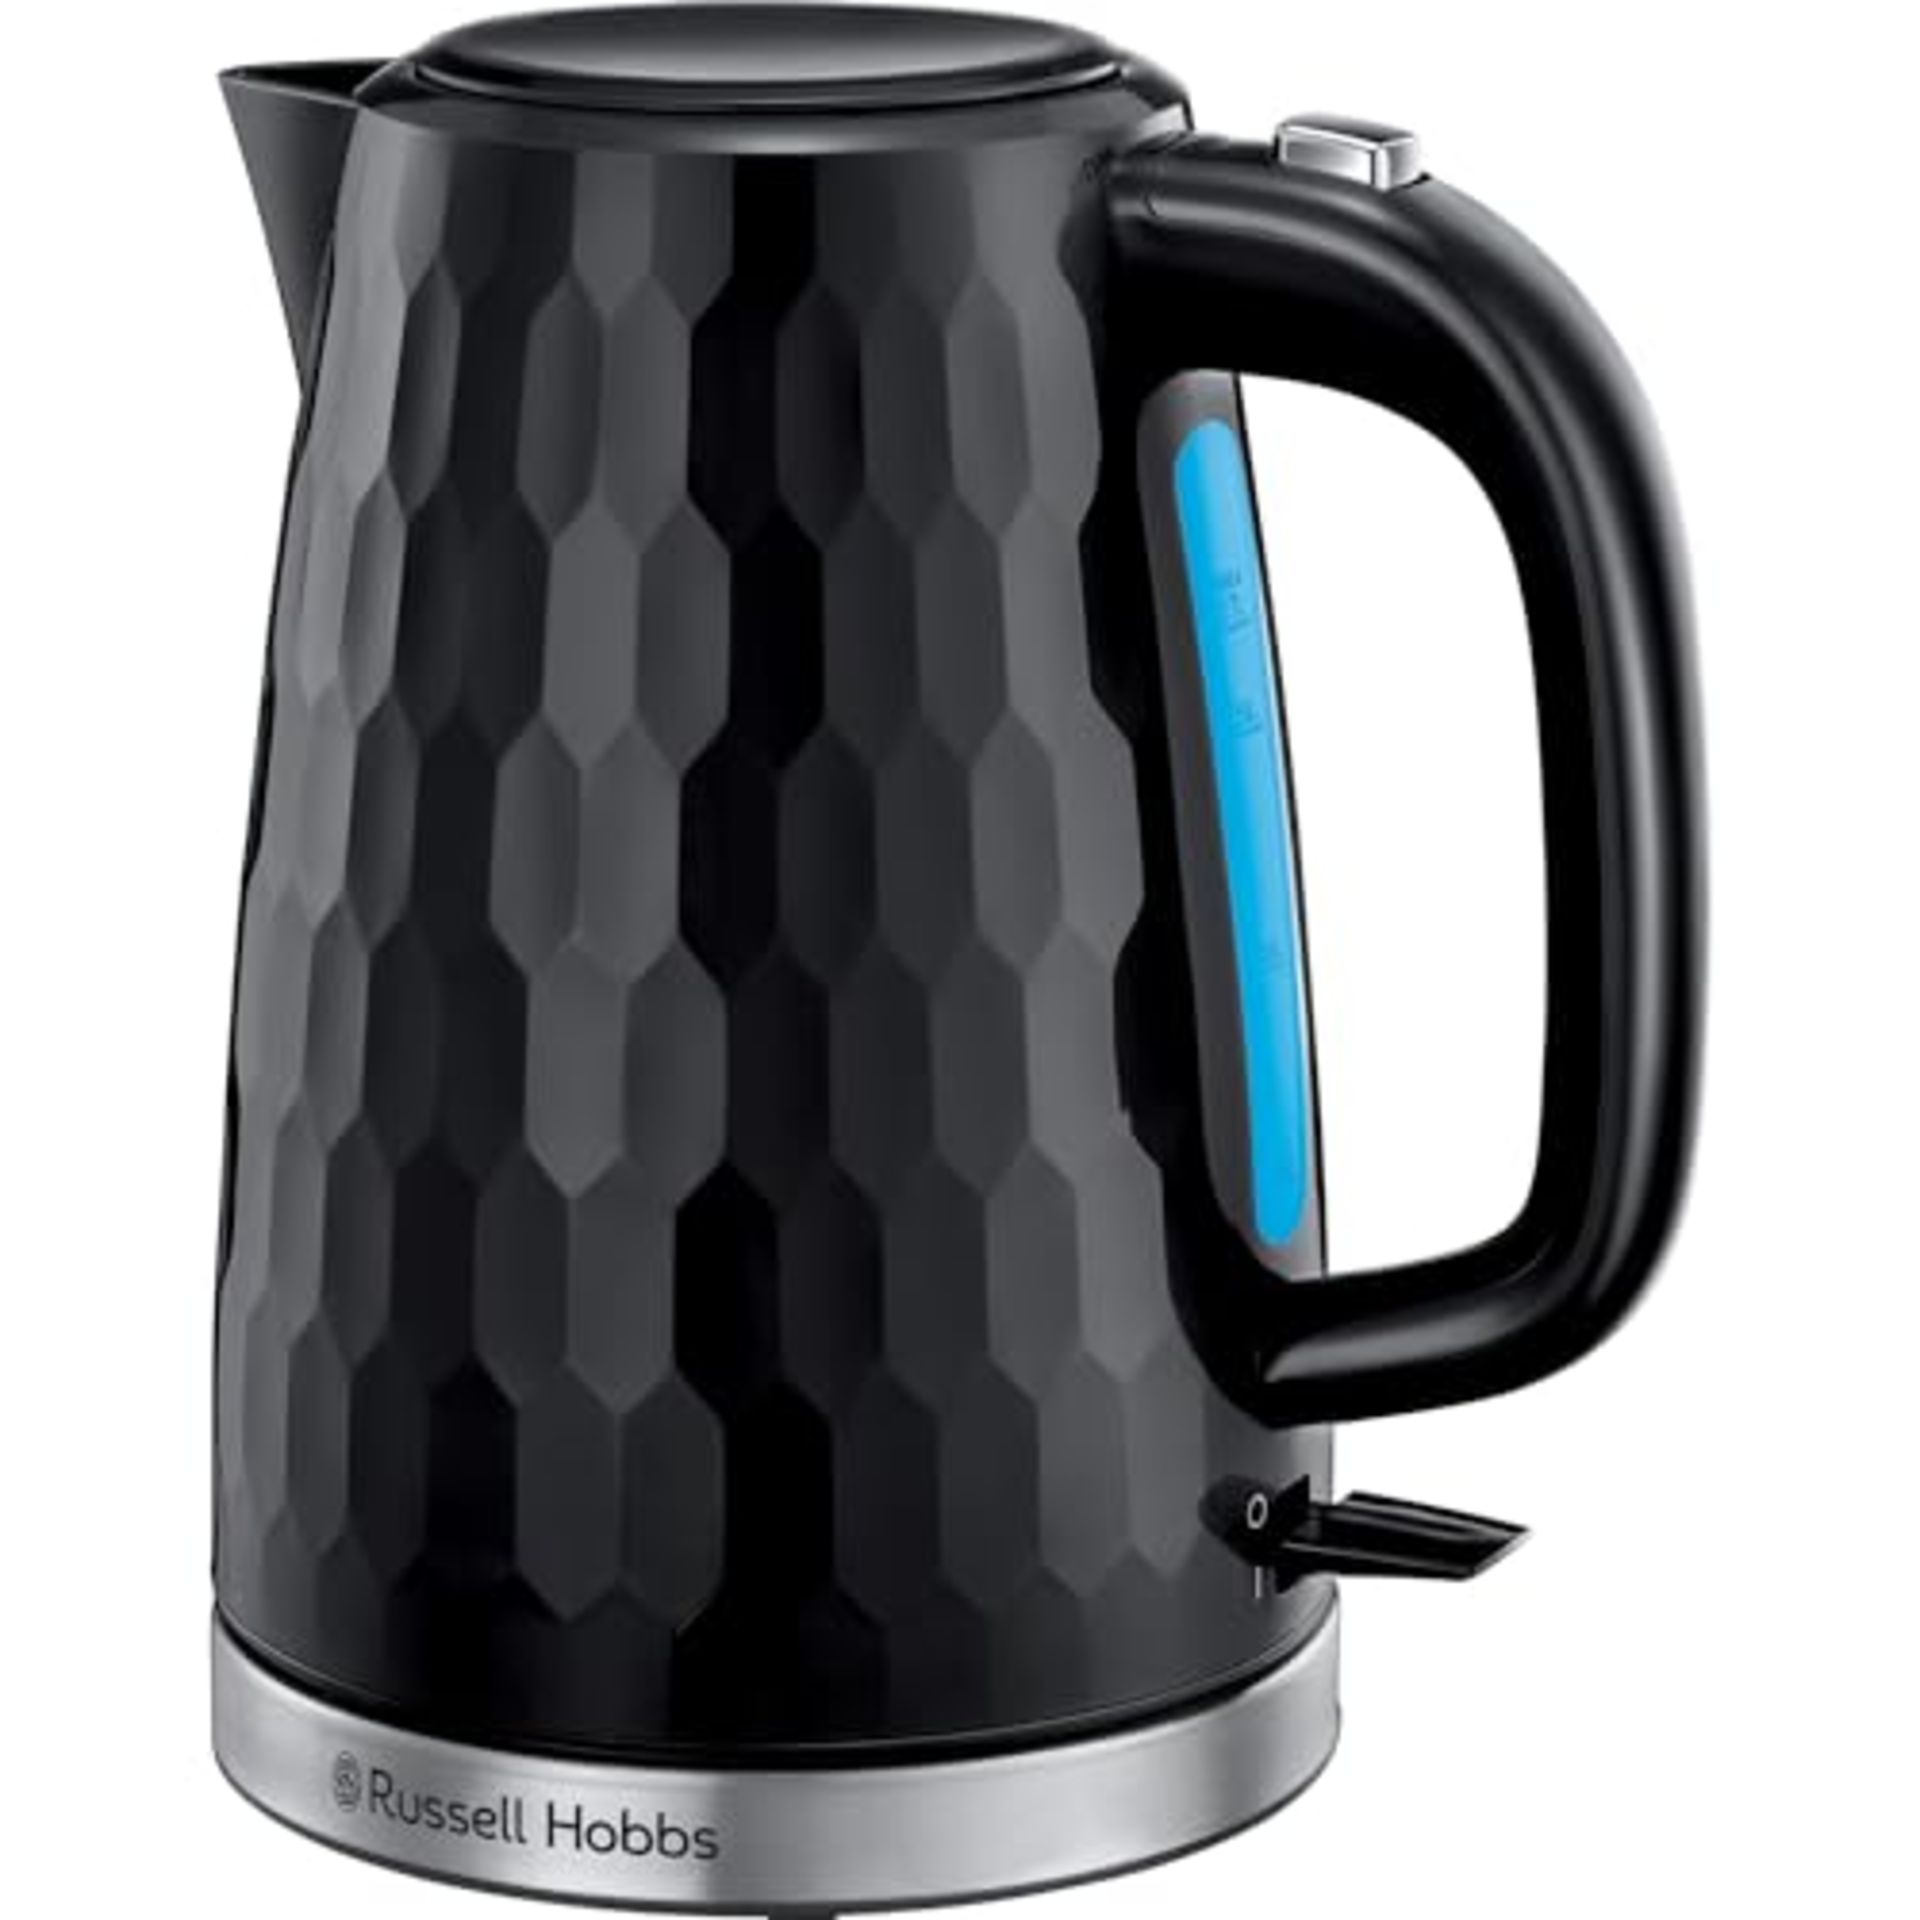 [INCOMPLETE] Russell Hobbs 26051 Cordless Electric Kettle - Contemporary Honeycomb Des